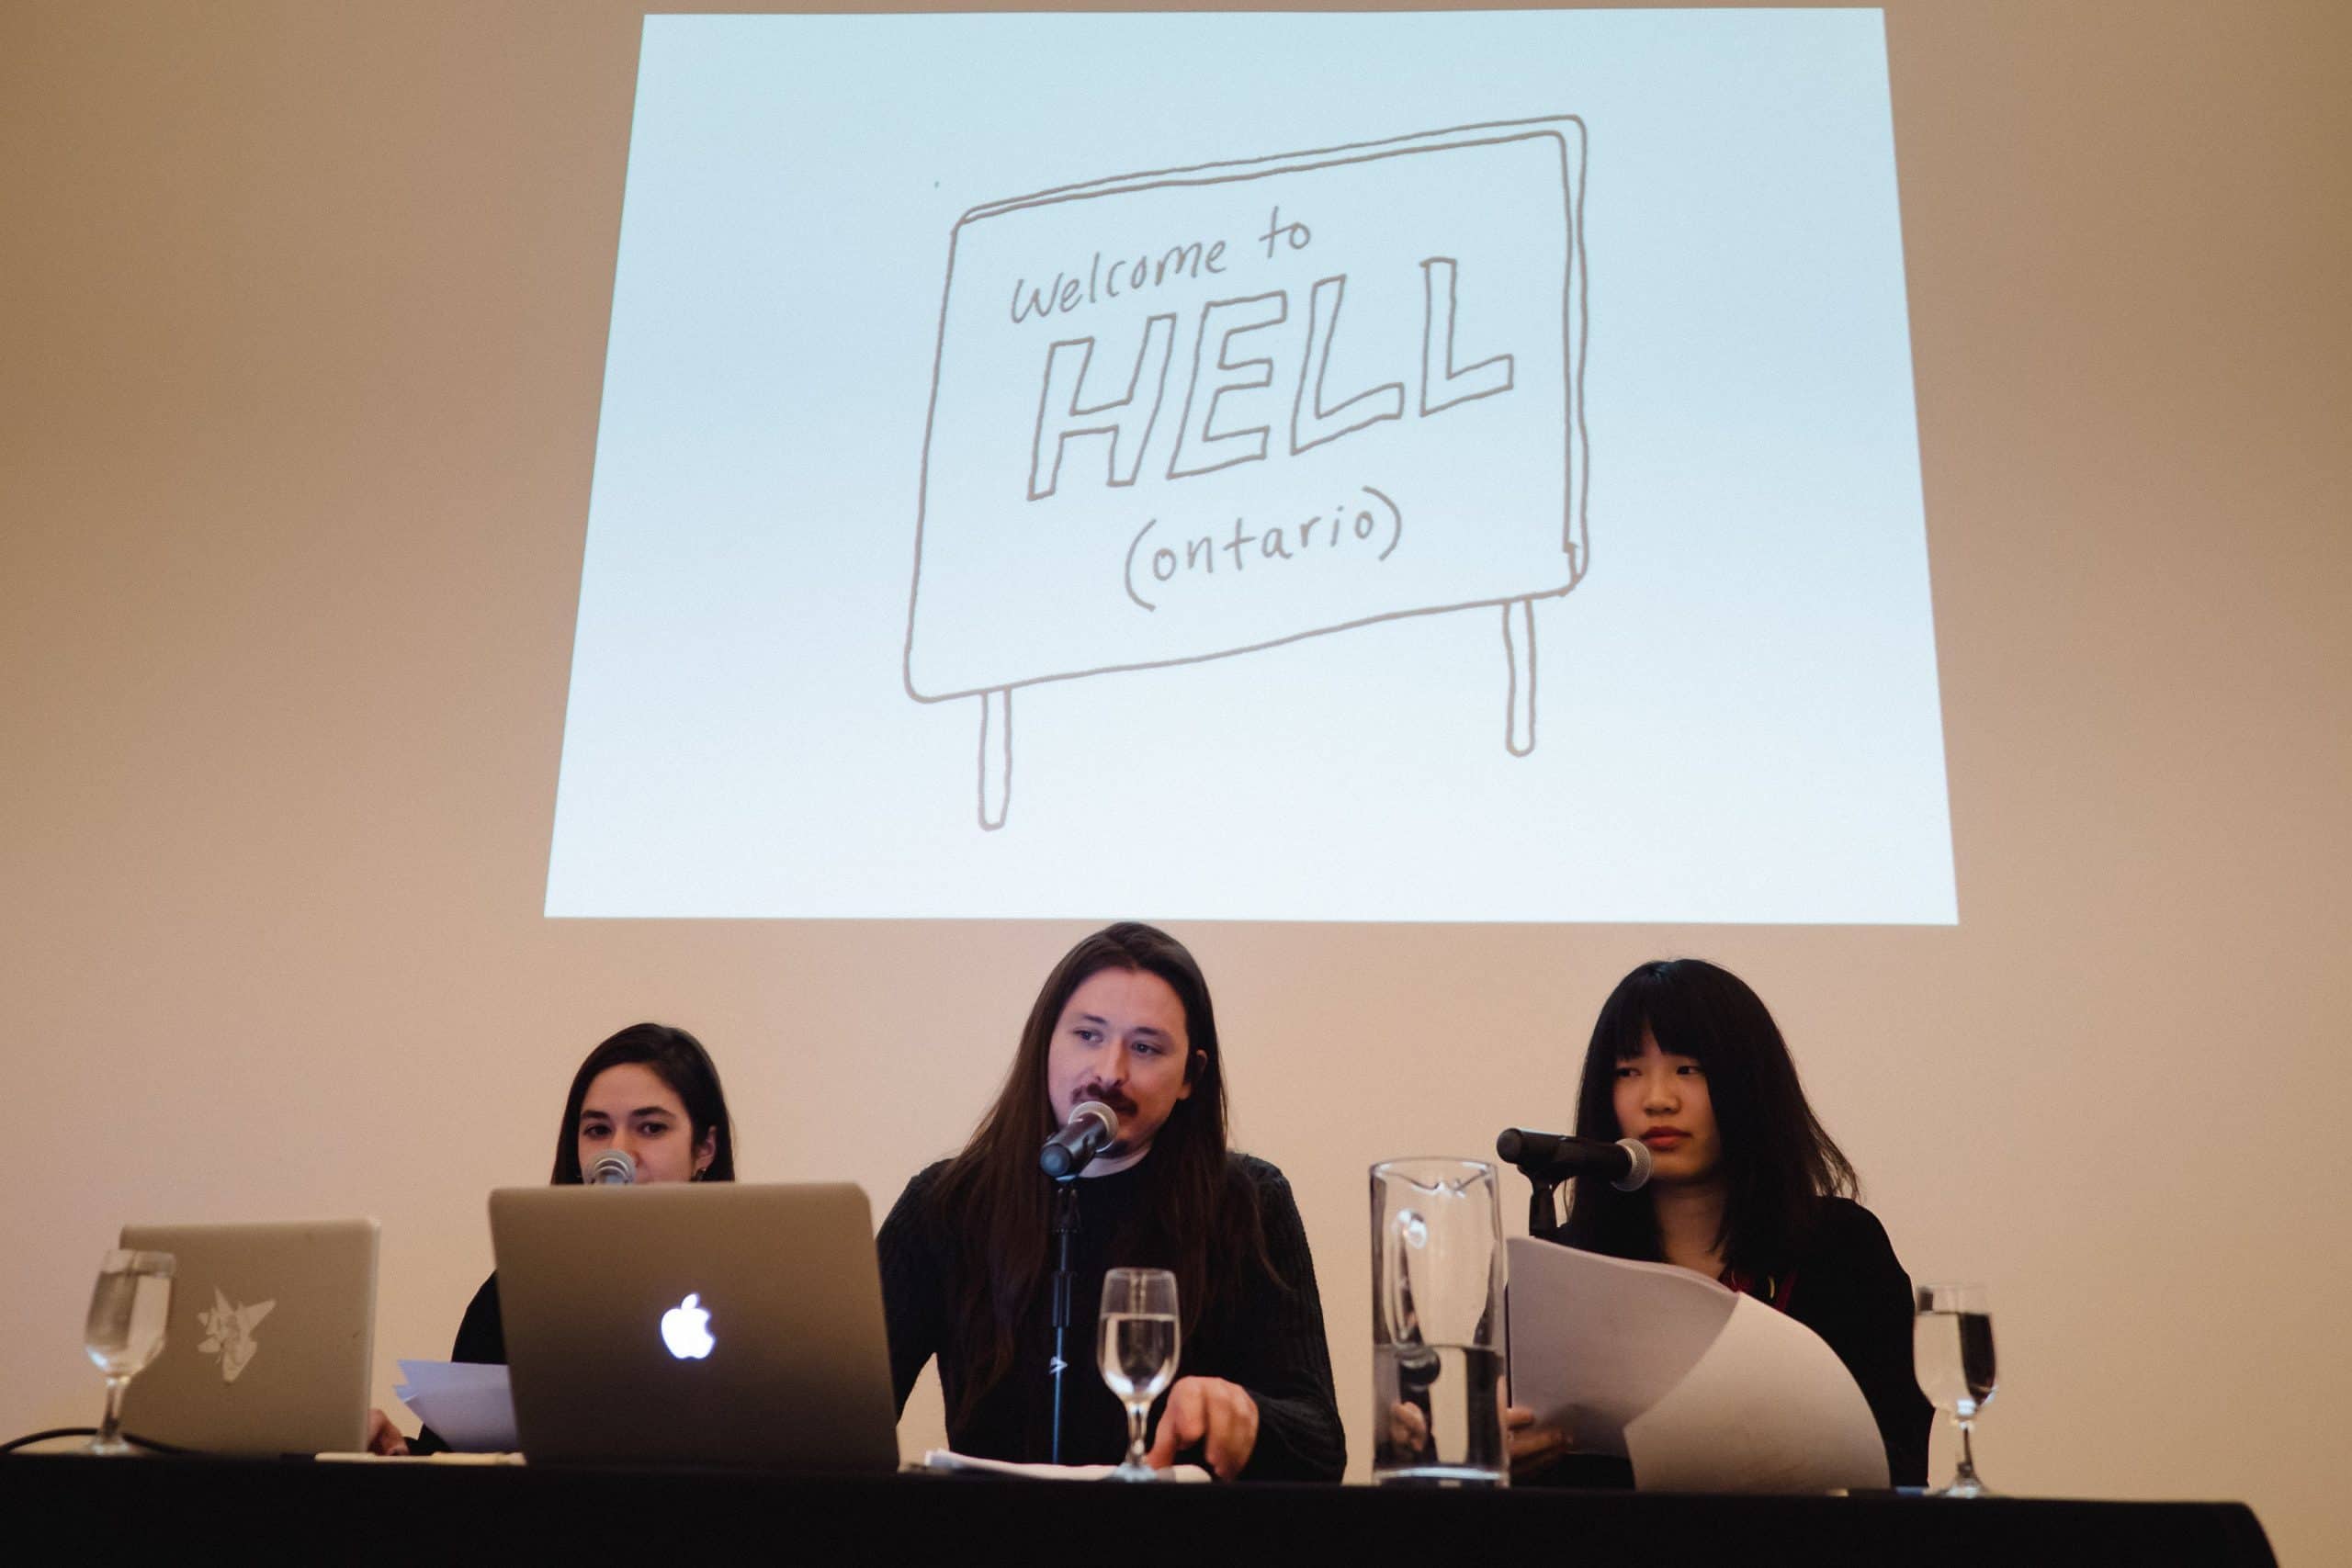 Walter Scott performs a live reading of in-progress material from Wendy goes to Hell alongside two members of the Queen’s academic community.